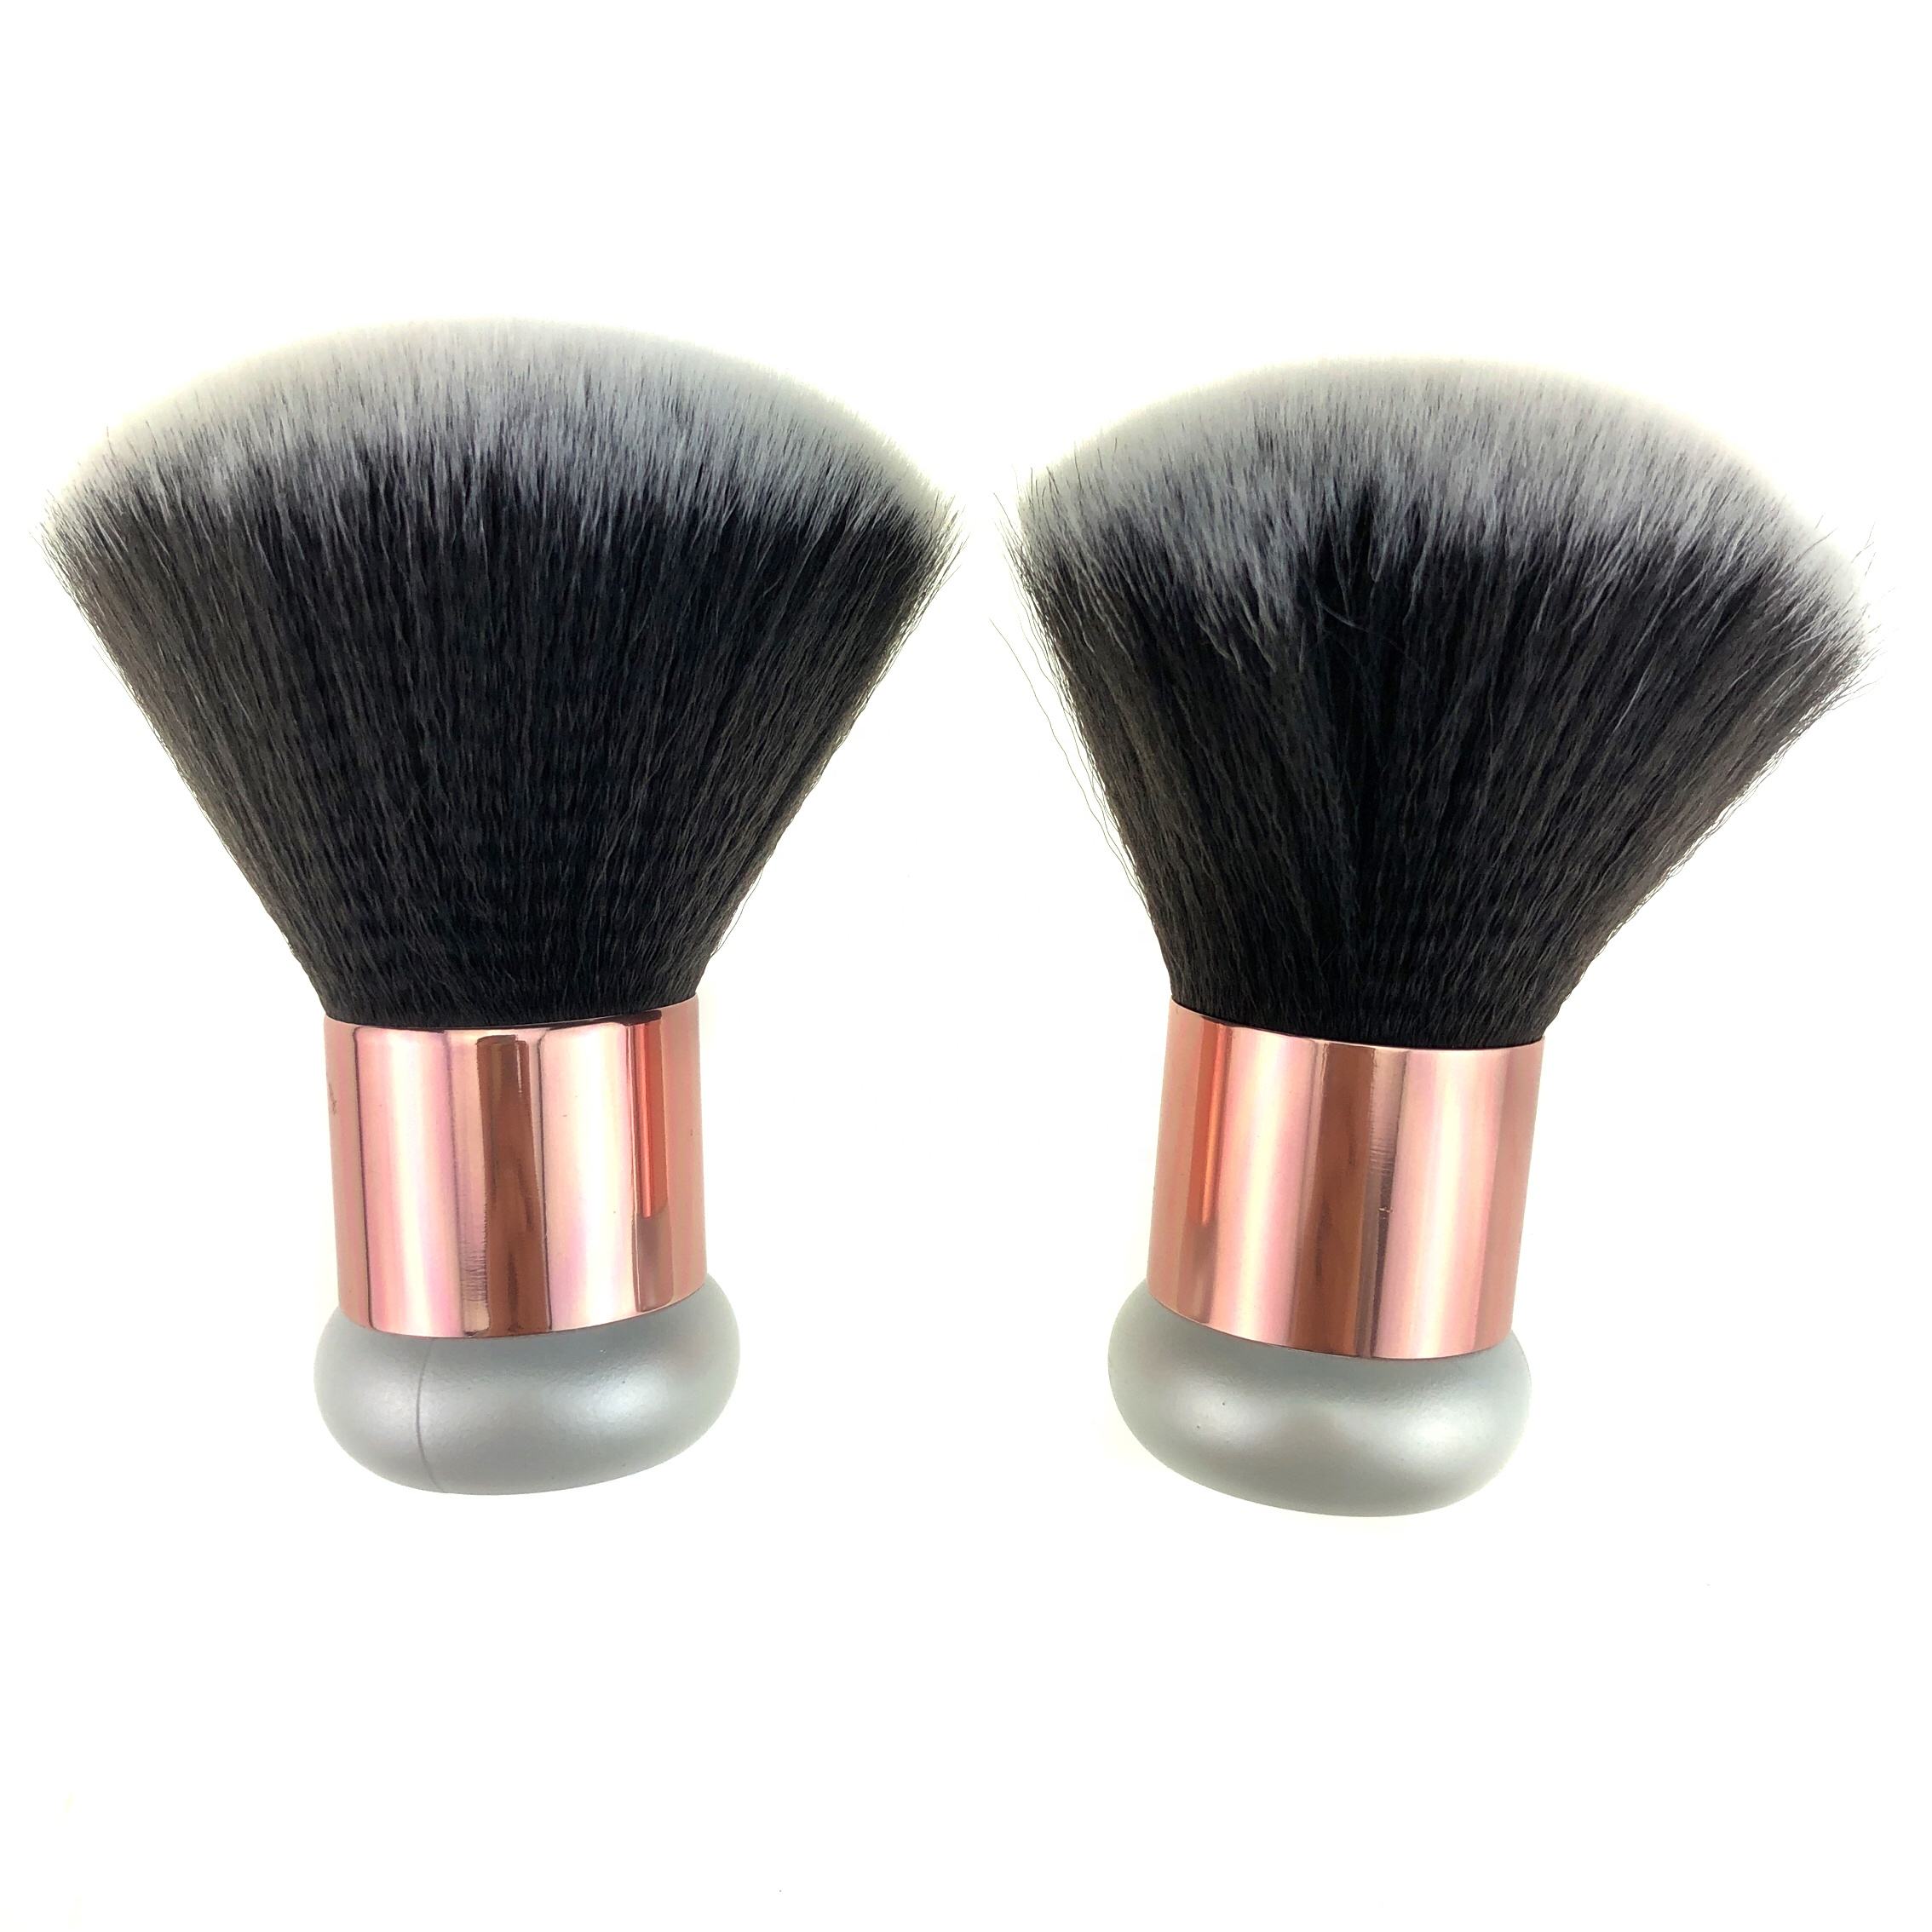 Ultra loose powder Makeup Brush For Setting Powder and Bronzers